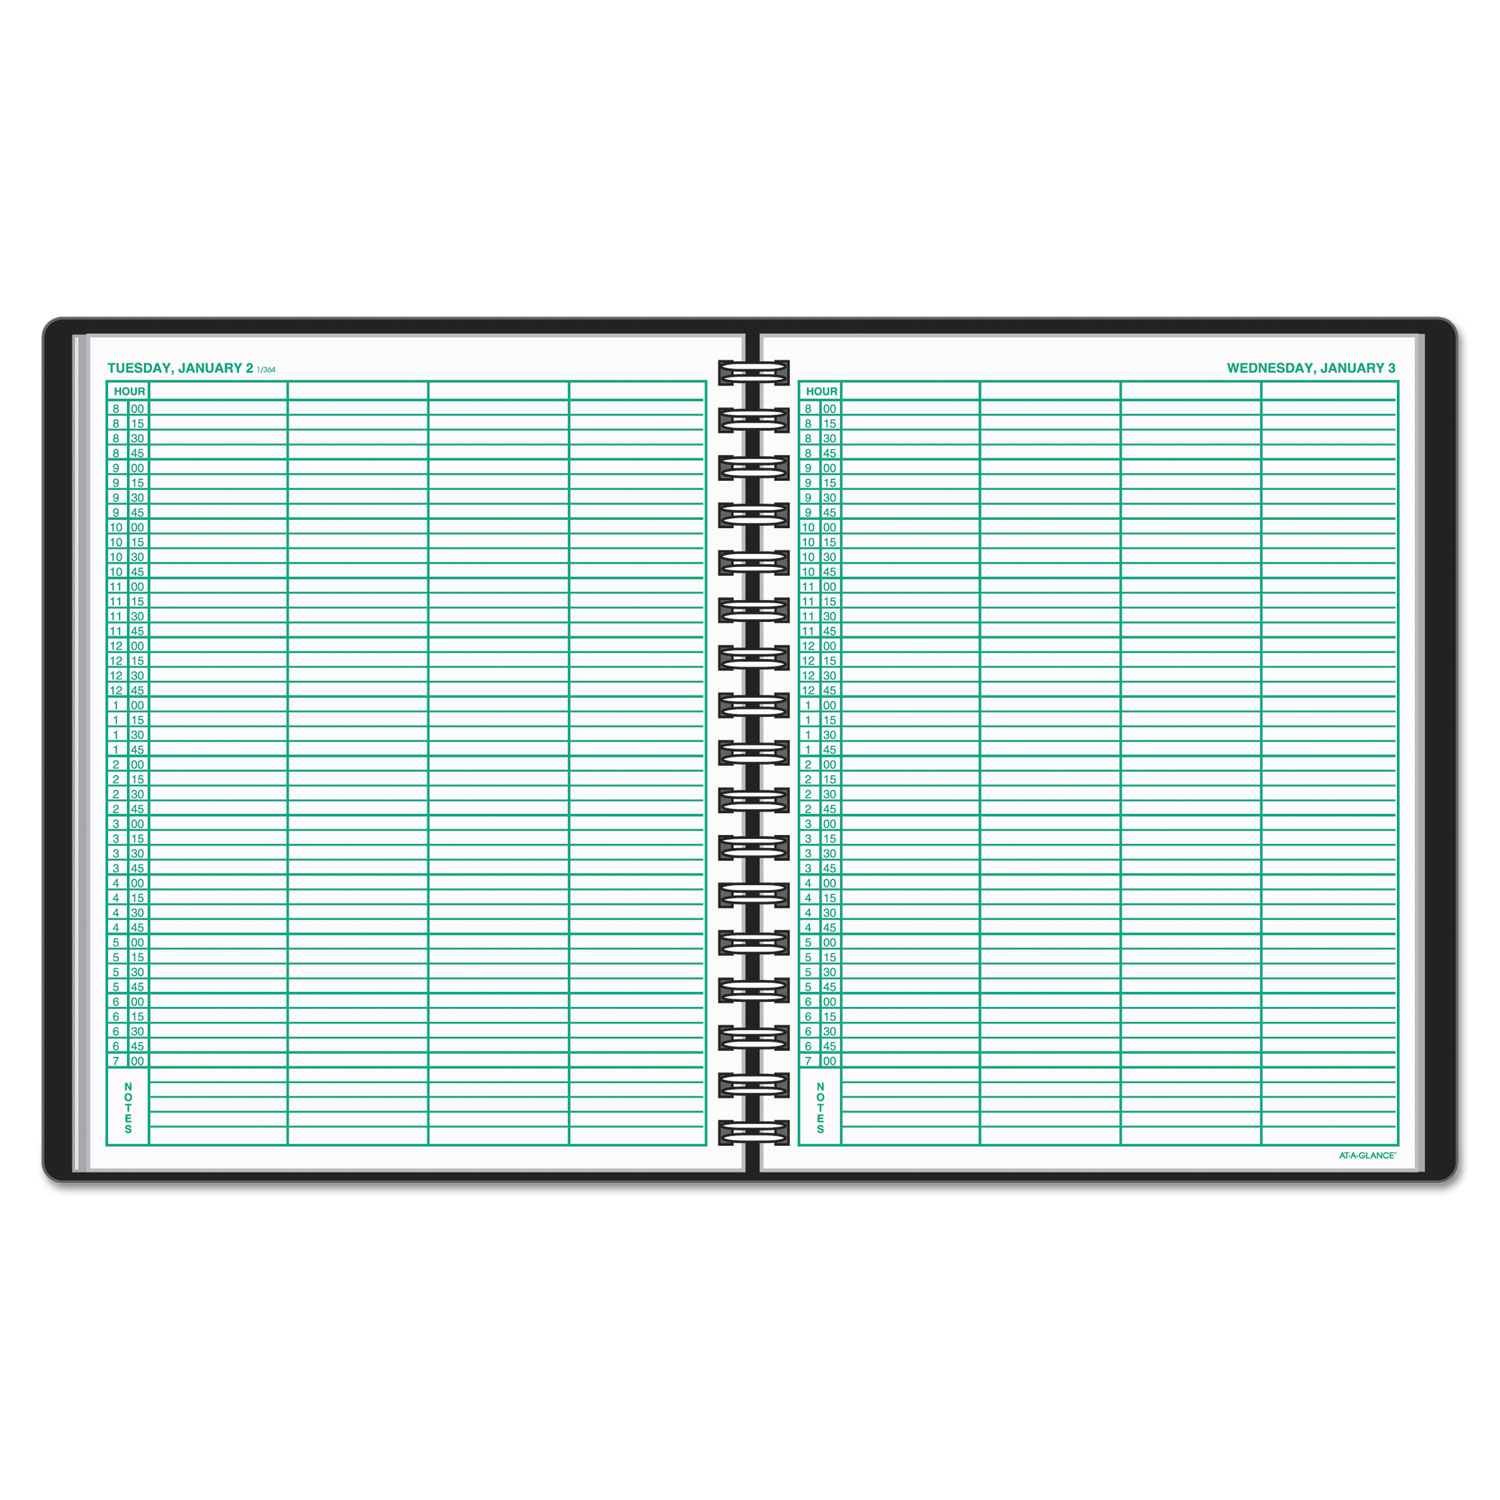 Four-Person Group Daily Appointment Book, 8 x 10 7/8, White, 2018